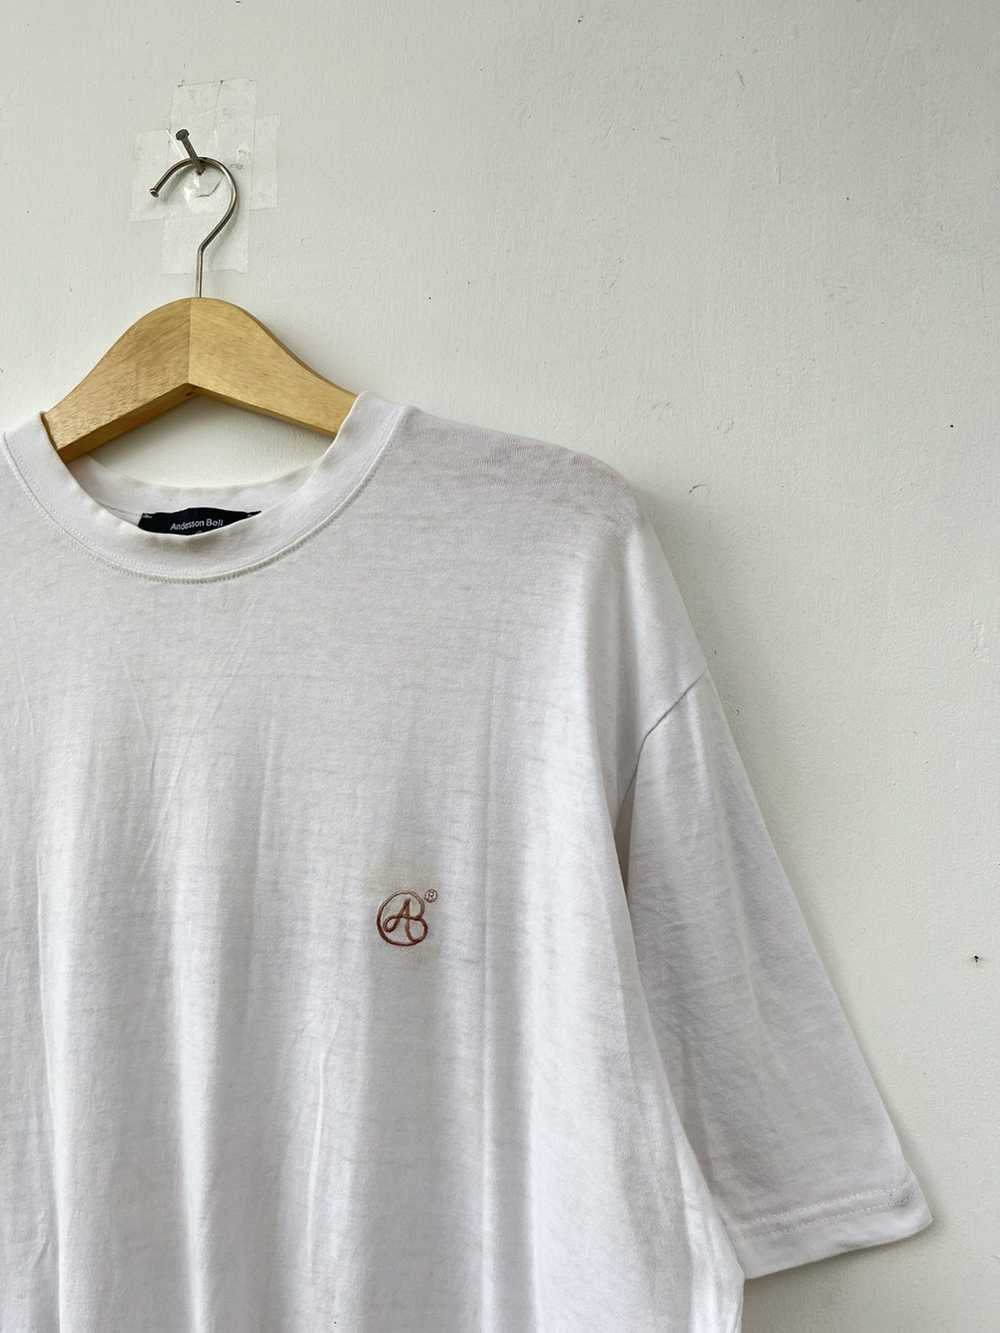 Andersson Bell ANDERSON BELL SS19 ‘BOHEMIAN’ TEE - image 4